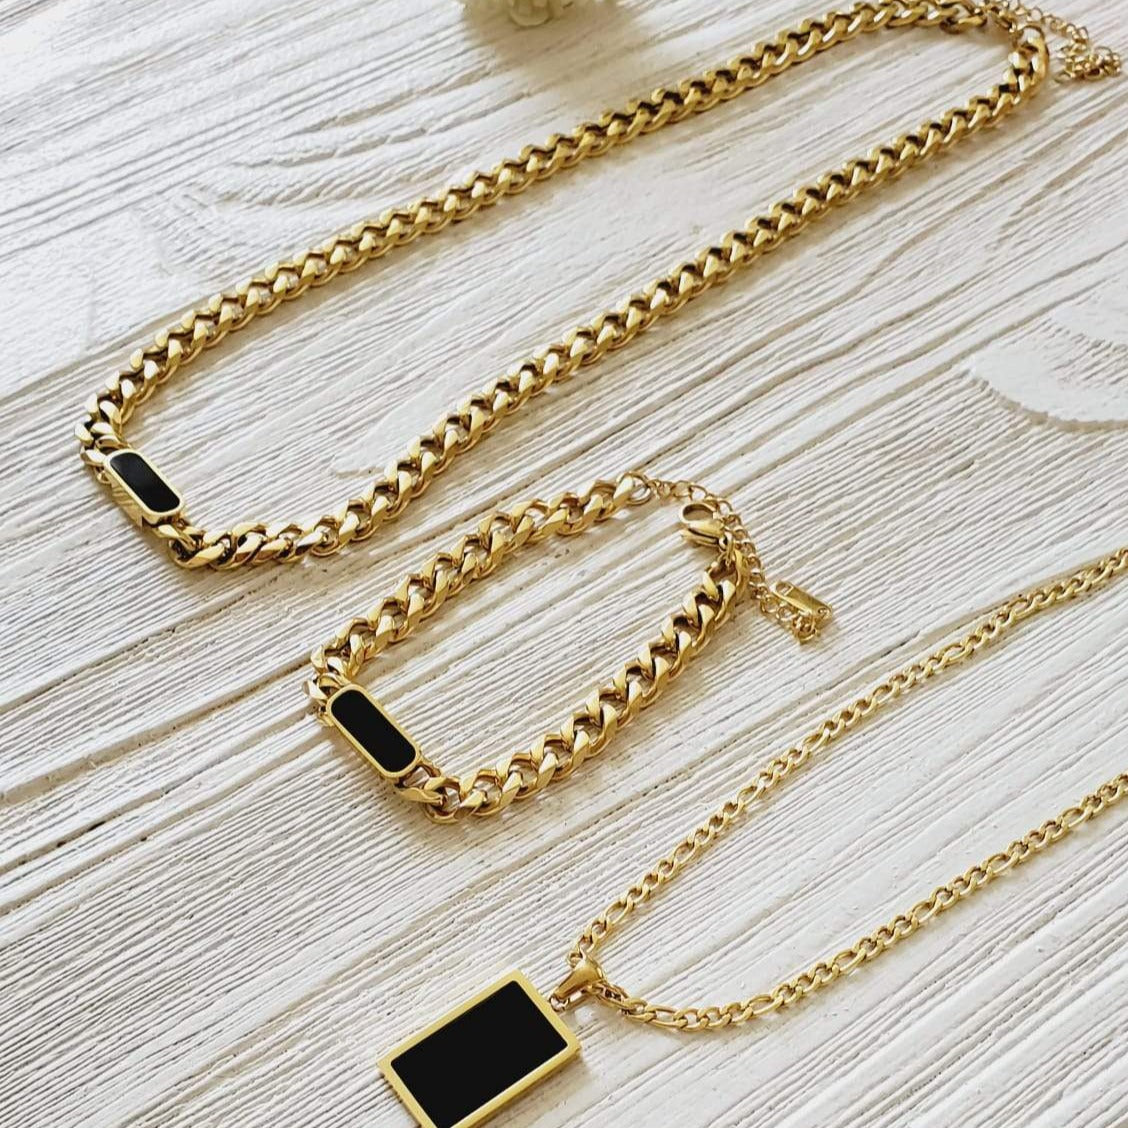 Mariner Link Chain, Heavy Chain Necklace, Thick Gold Chain, Chunky Gold Choker, Puffy Mariner Chain, Gold Mariner Chain, Gold Anchor Link, Puff Link Chain, Mariner Necklace, Puffy Link Necklace, Gold Puff Chain, Thick Puff Necklace, Black Gold Plated Set, Black Gold Jewelry, Christmas Gift for her, Christmas Gift for Wife